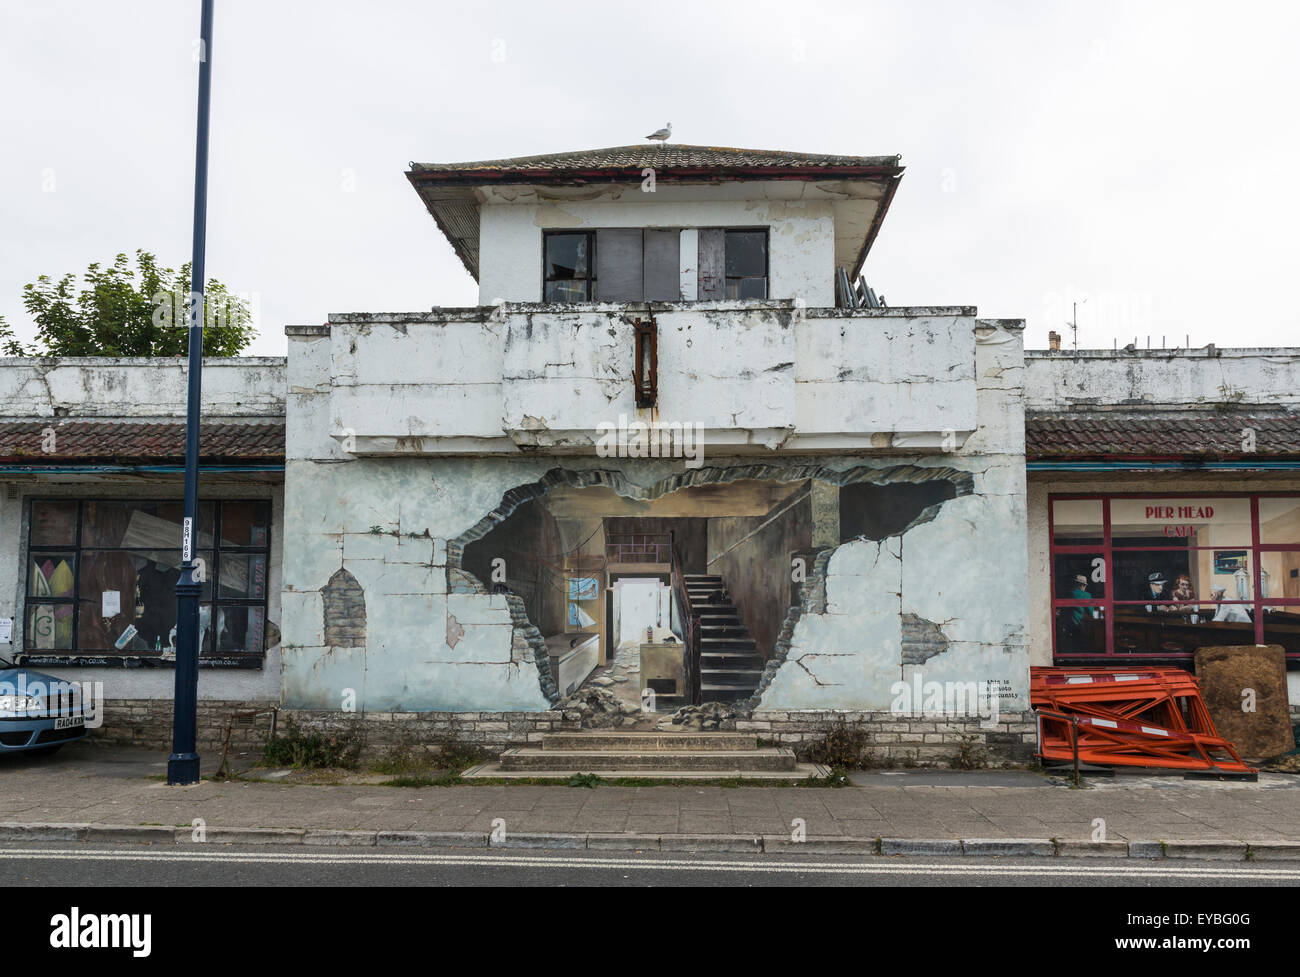 Street scene of realistic, convincing trompe l'oeil painting on an old roadside building wall in Swanage, Isle of Purbeck, Dorset, south-west England Stock Photo